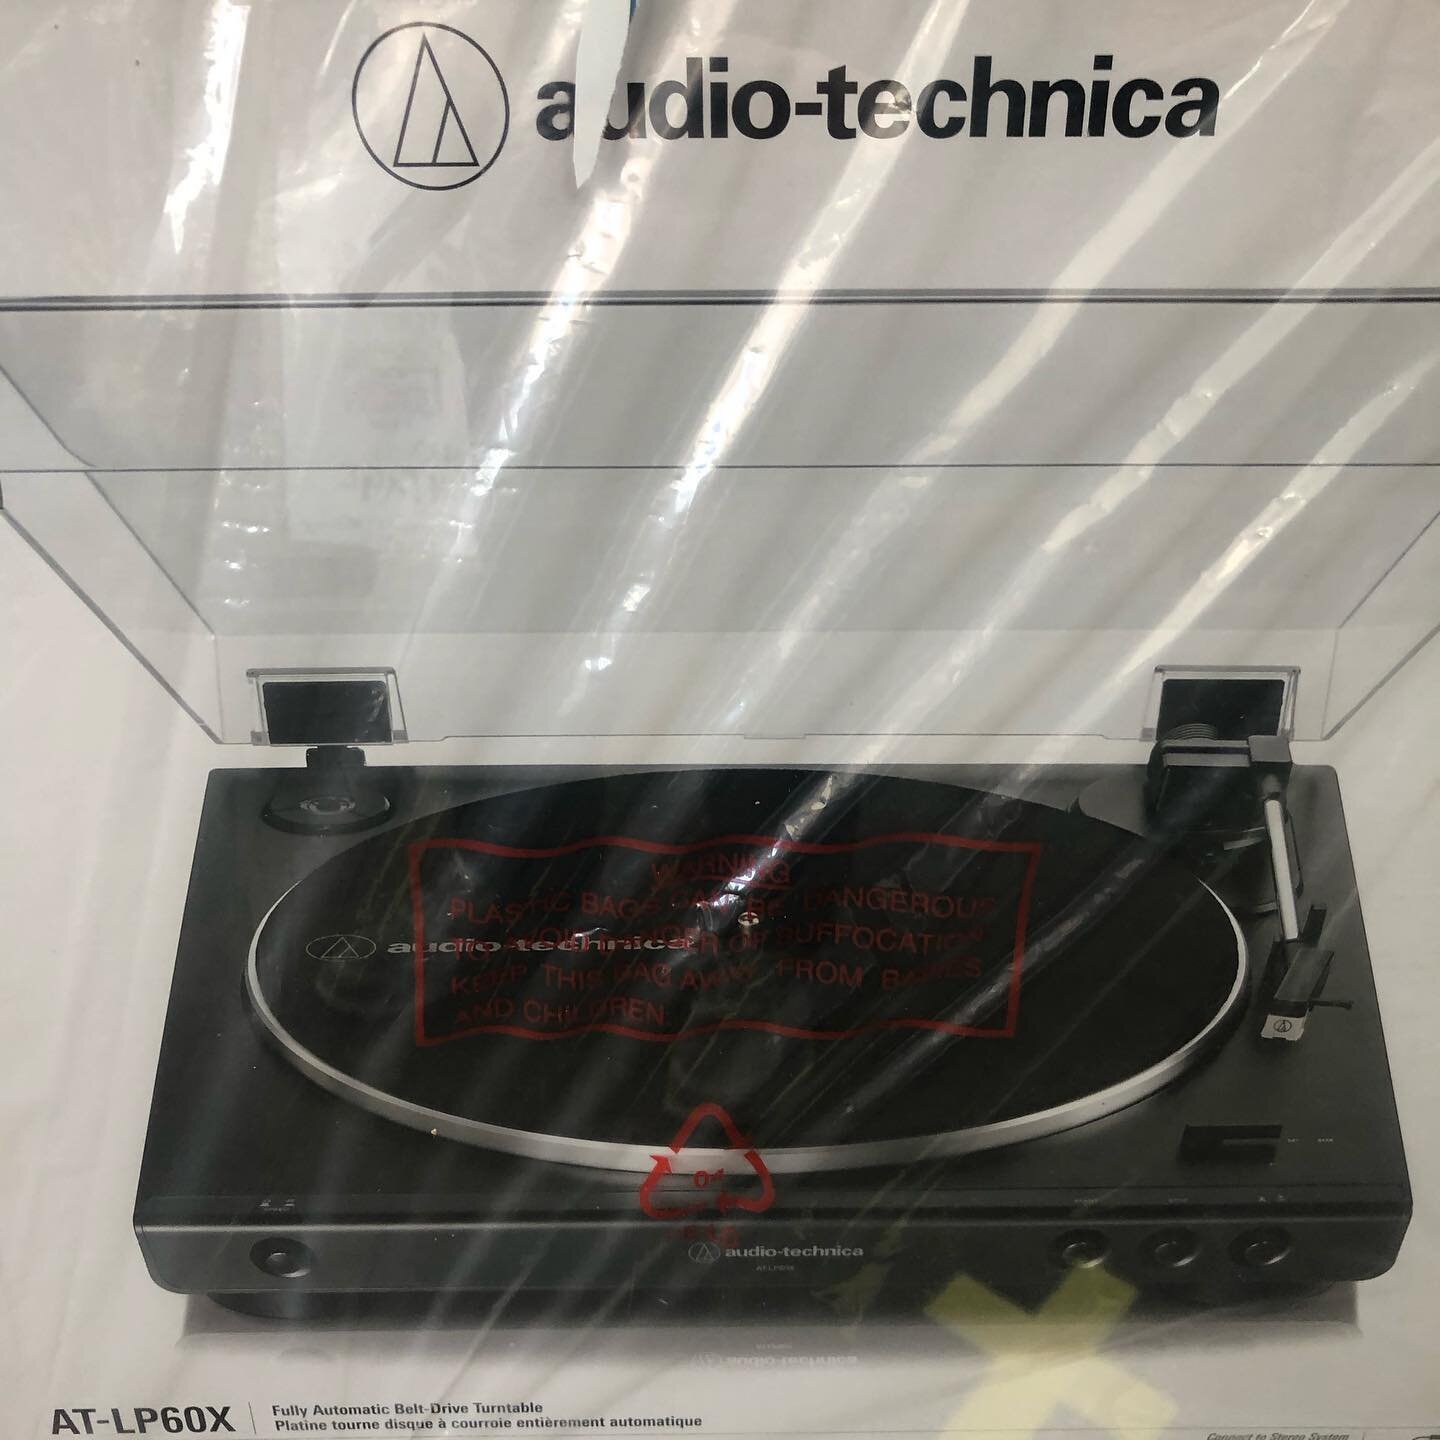 REPOST: This weekend, buy a brand new Audio-technica LP-60x turntable ($129.99) and get a FREE Vinyl Styl Ultimate Care Kit (a free $30 value!!!). Have a loyalty account? This purchase automatically gives you $5 off your next purchase and you&rsquo;r